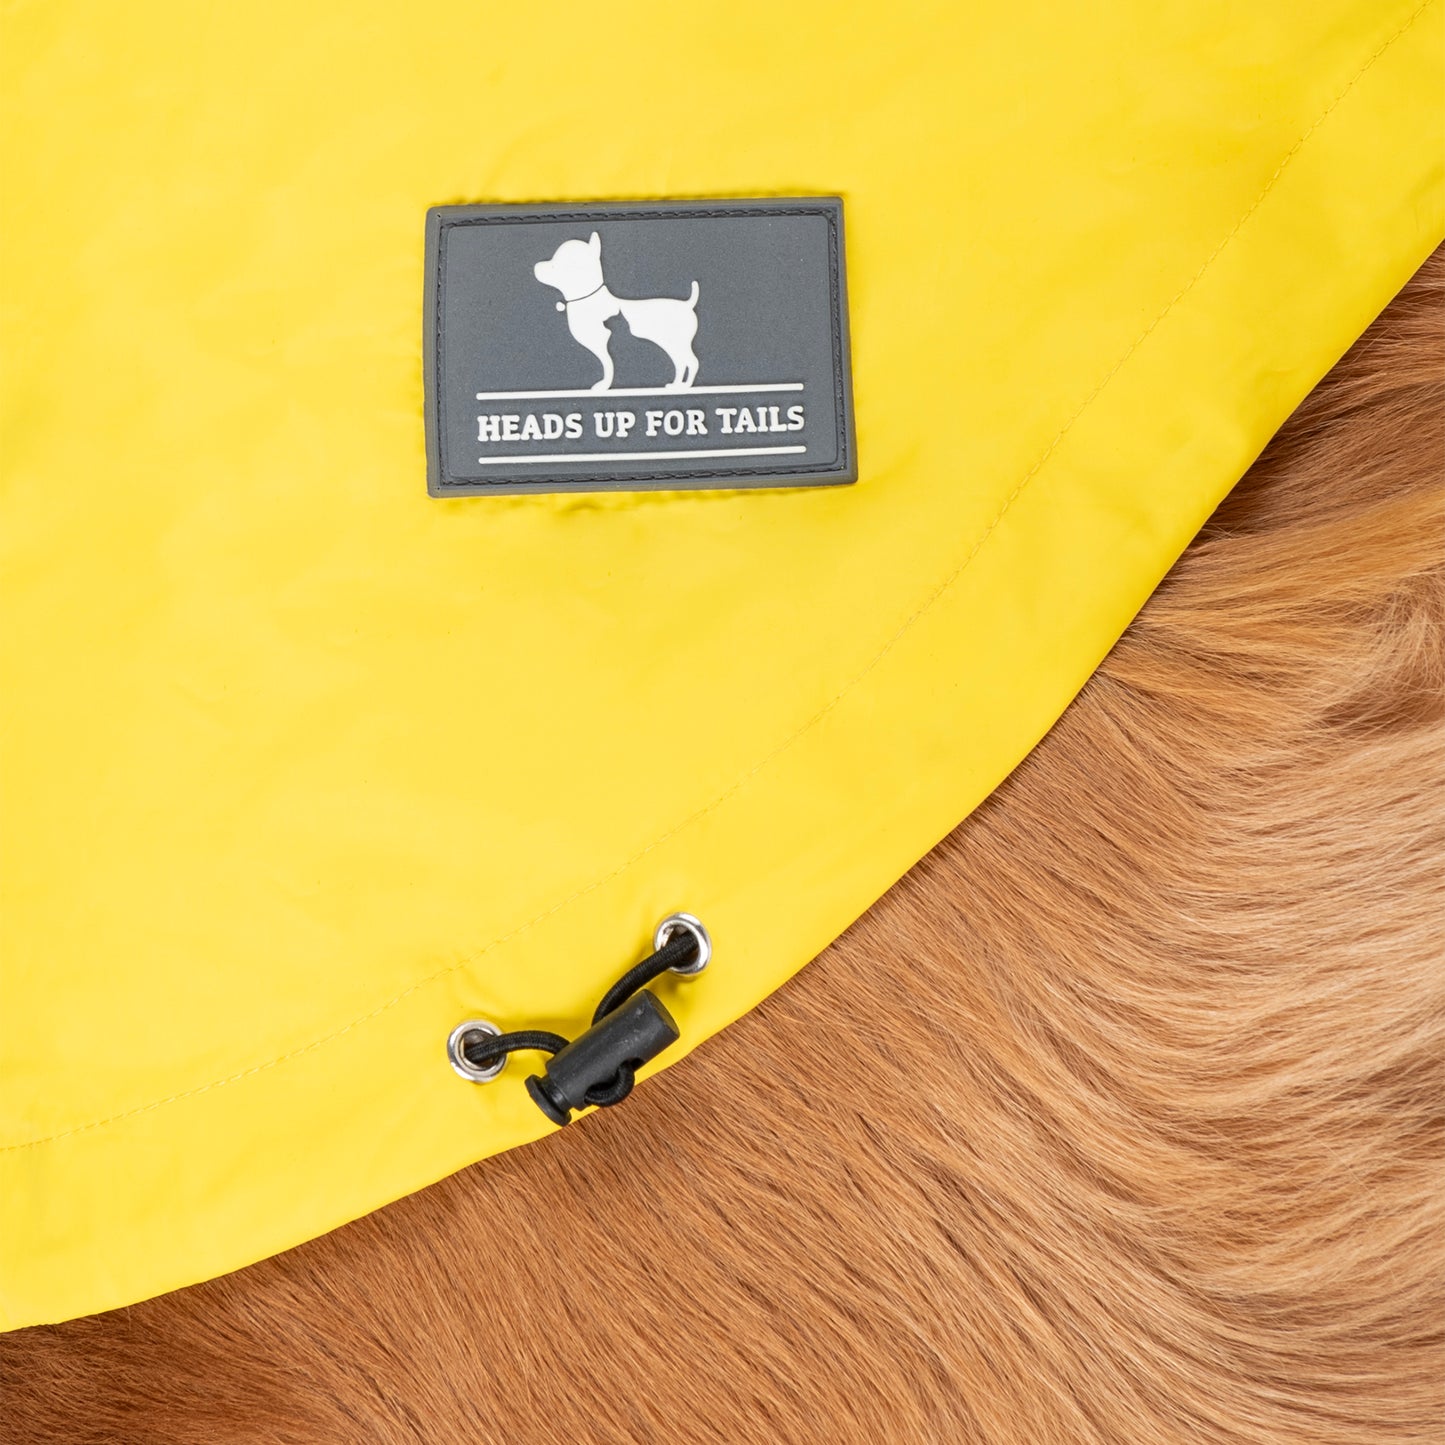 HUFT Magical Mist Raincoats For Dog & Cat - Sunshine Yellow - Heads Up For Tails